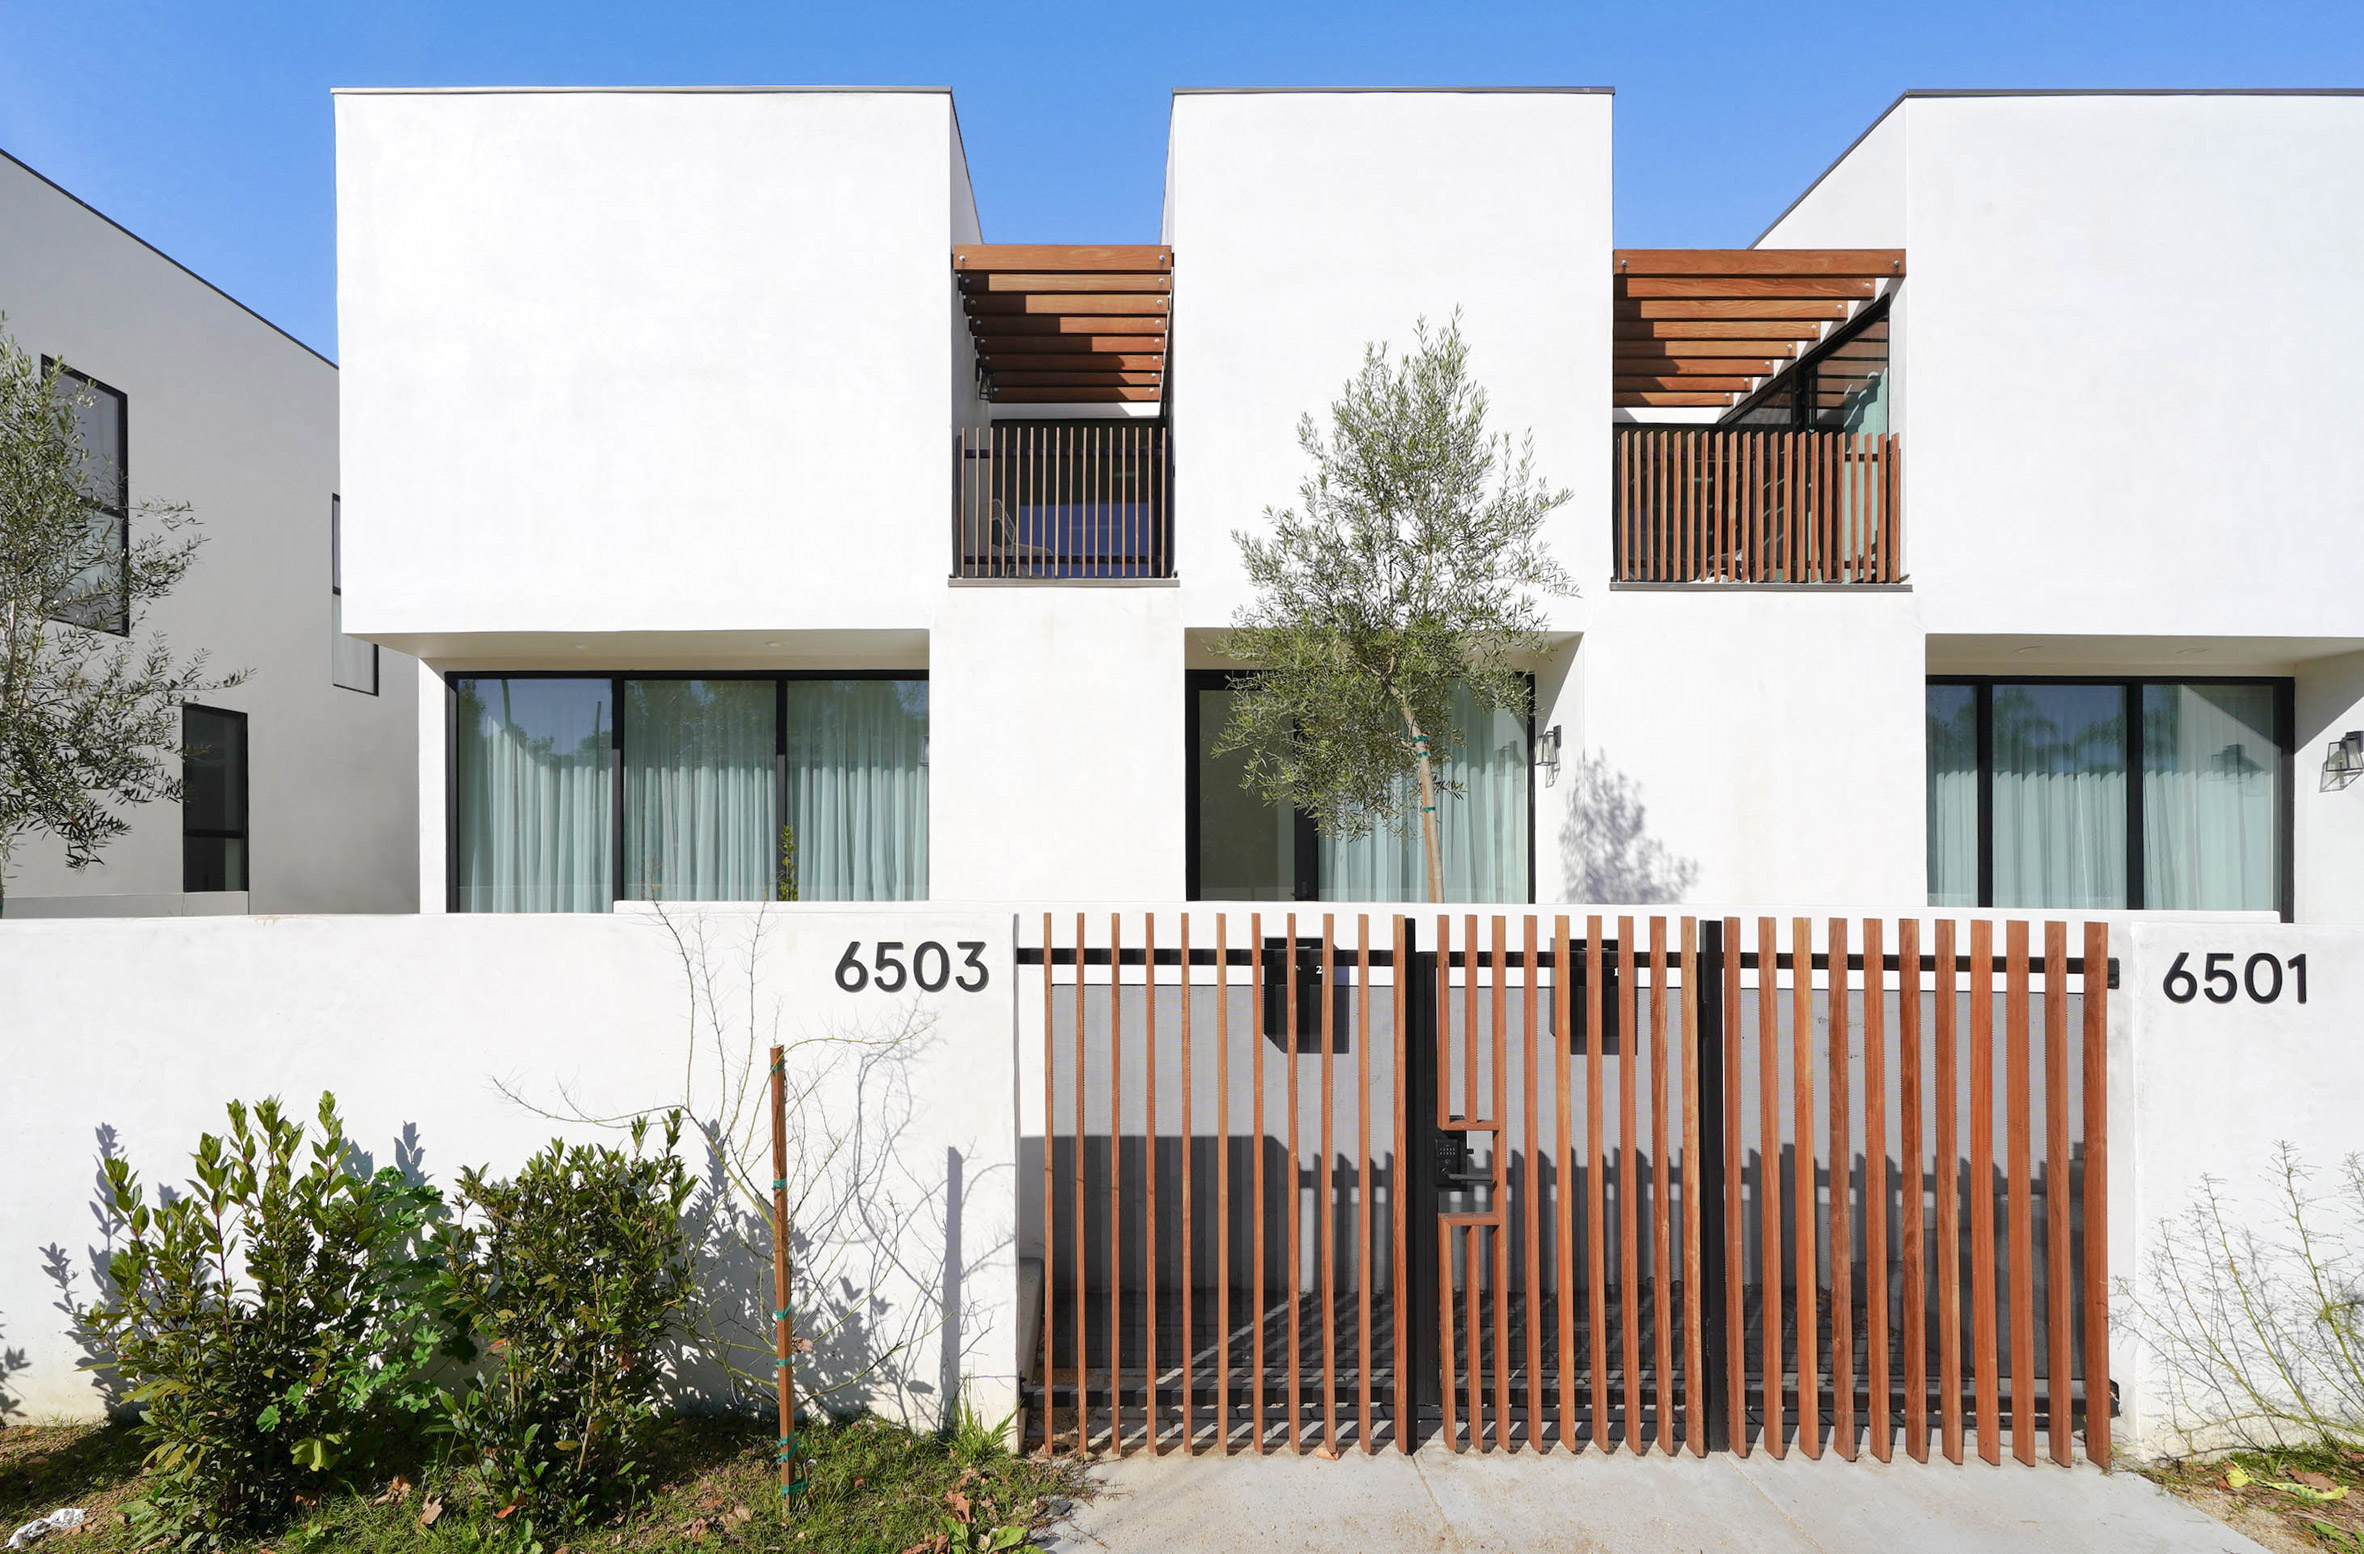 Common Melrose housing block in Los Angeles by Bittoni Architects